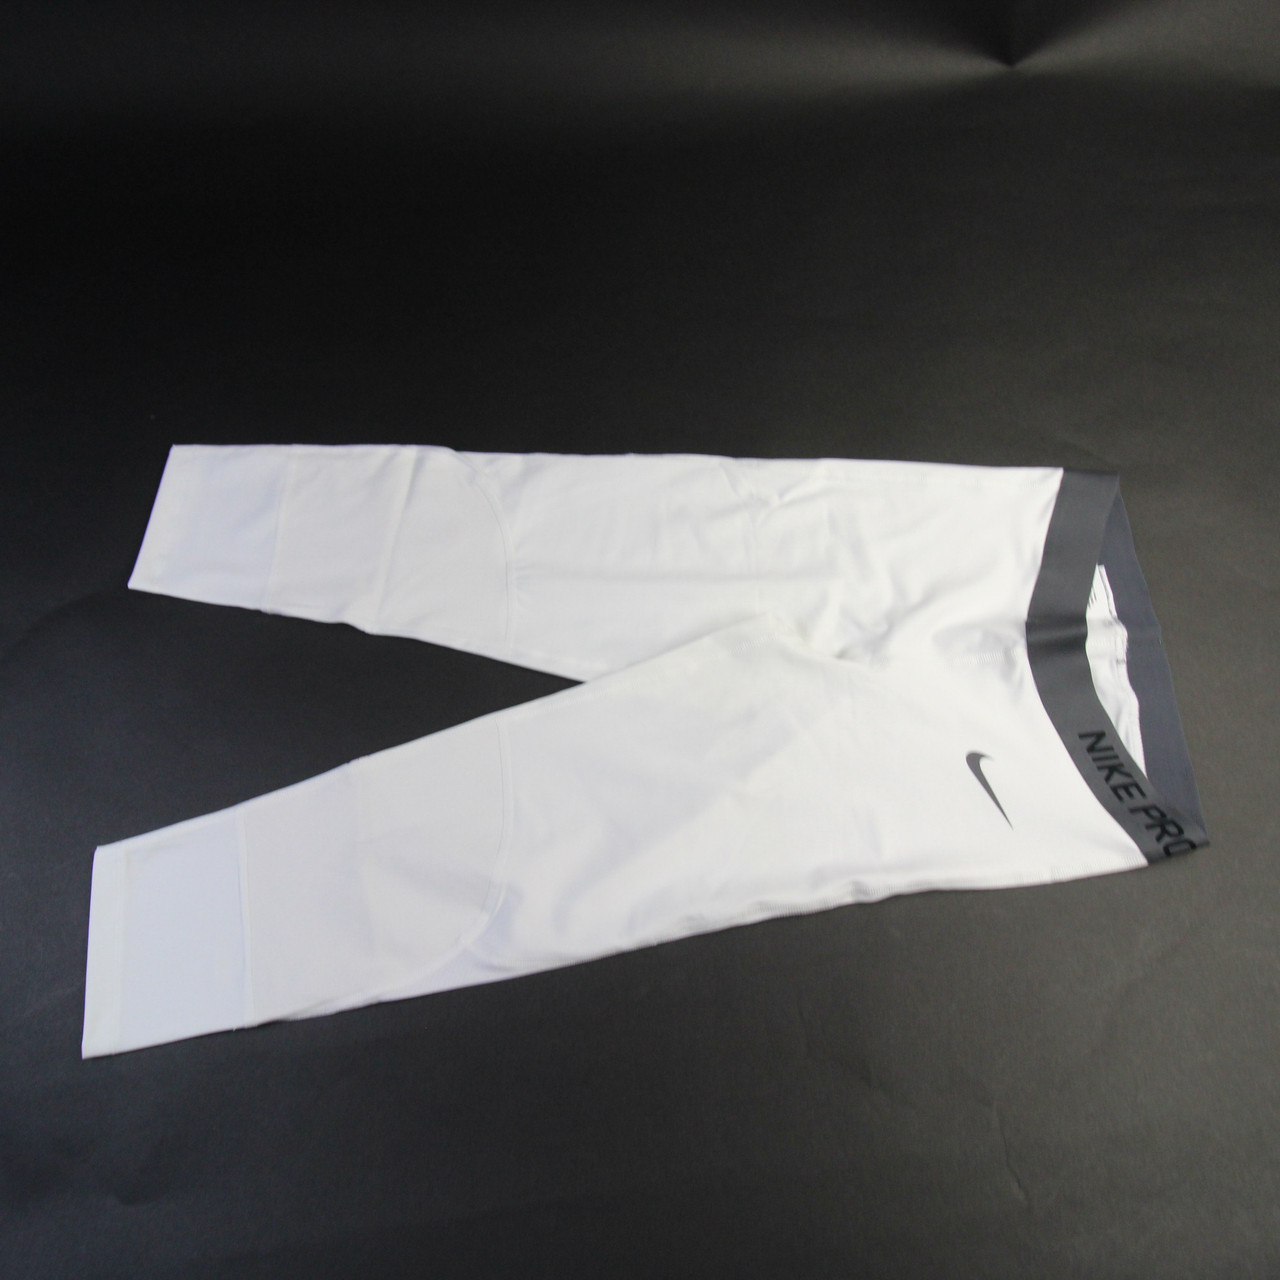 Nike Dri-Fit Compression Pants Women's White New with Tags L 561